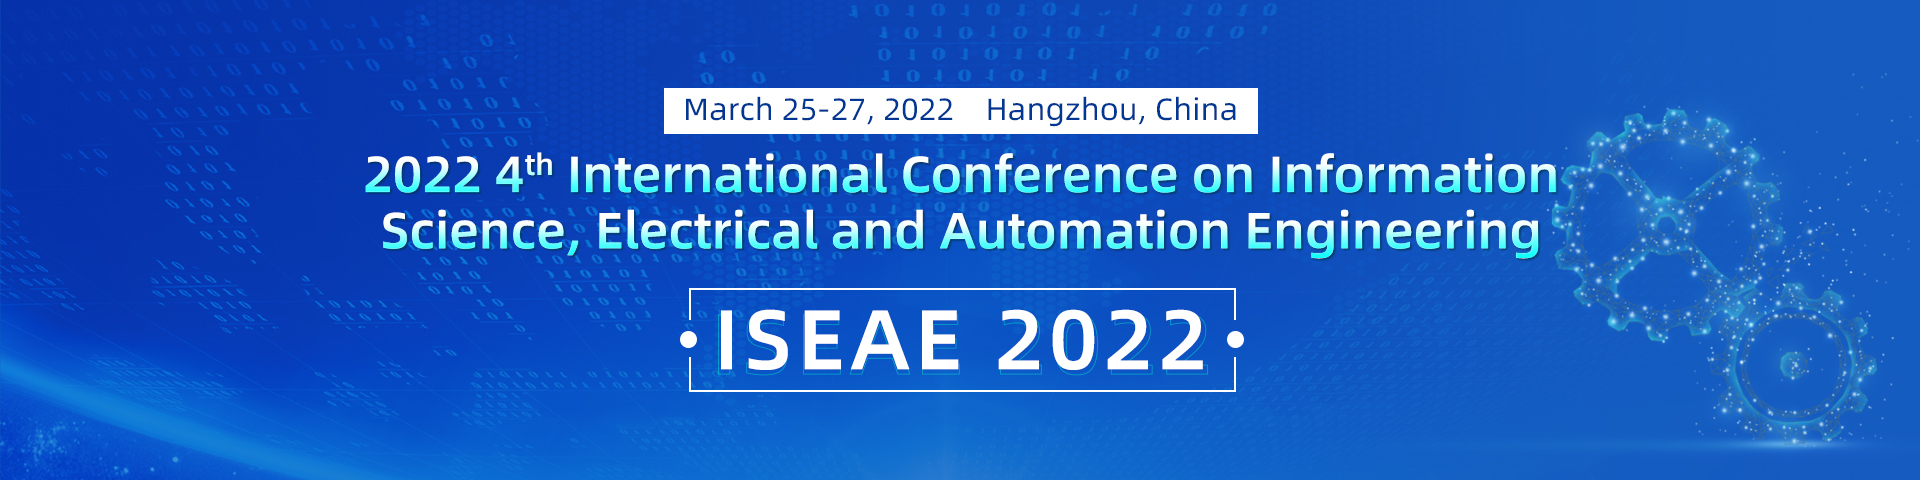 2022 4th International Conference on Information Science, Electrical and Automation Engineering（ISEAE 2022）, Hangzhou, Zhejiang, China